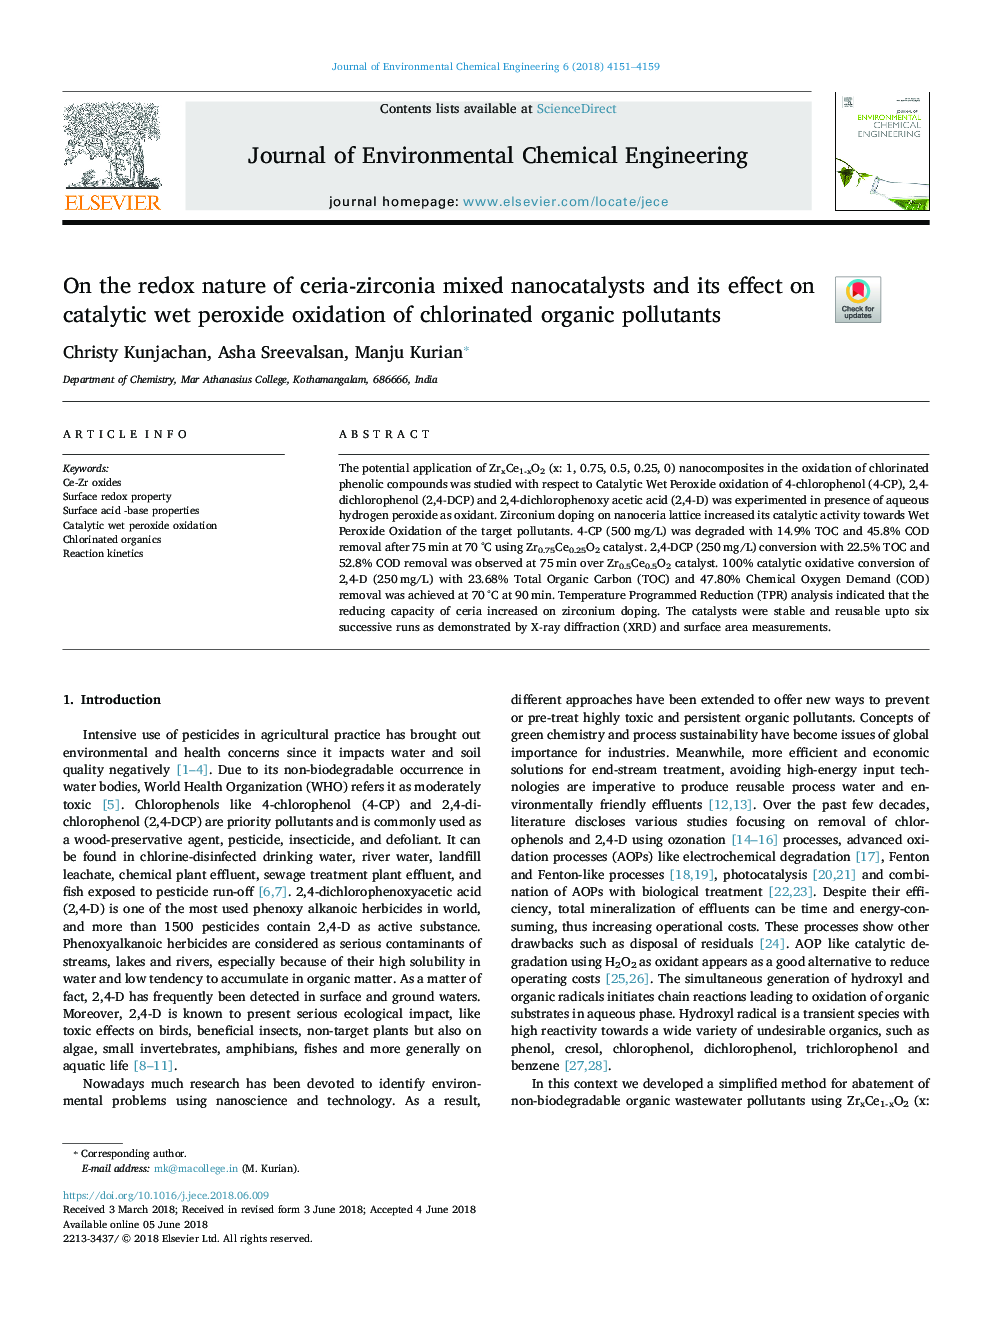 On the redox nature of ceria-zirconia mixed nanocatalysts and its effect on catalytic wet peroxide oxidation of chlorinated organic pollutants